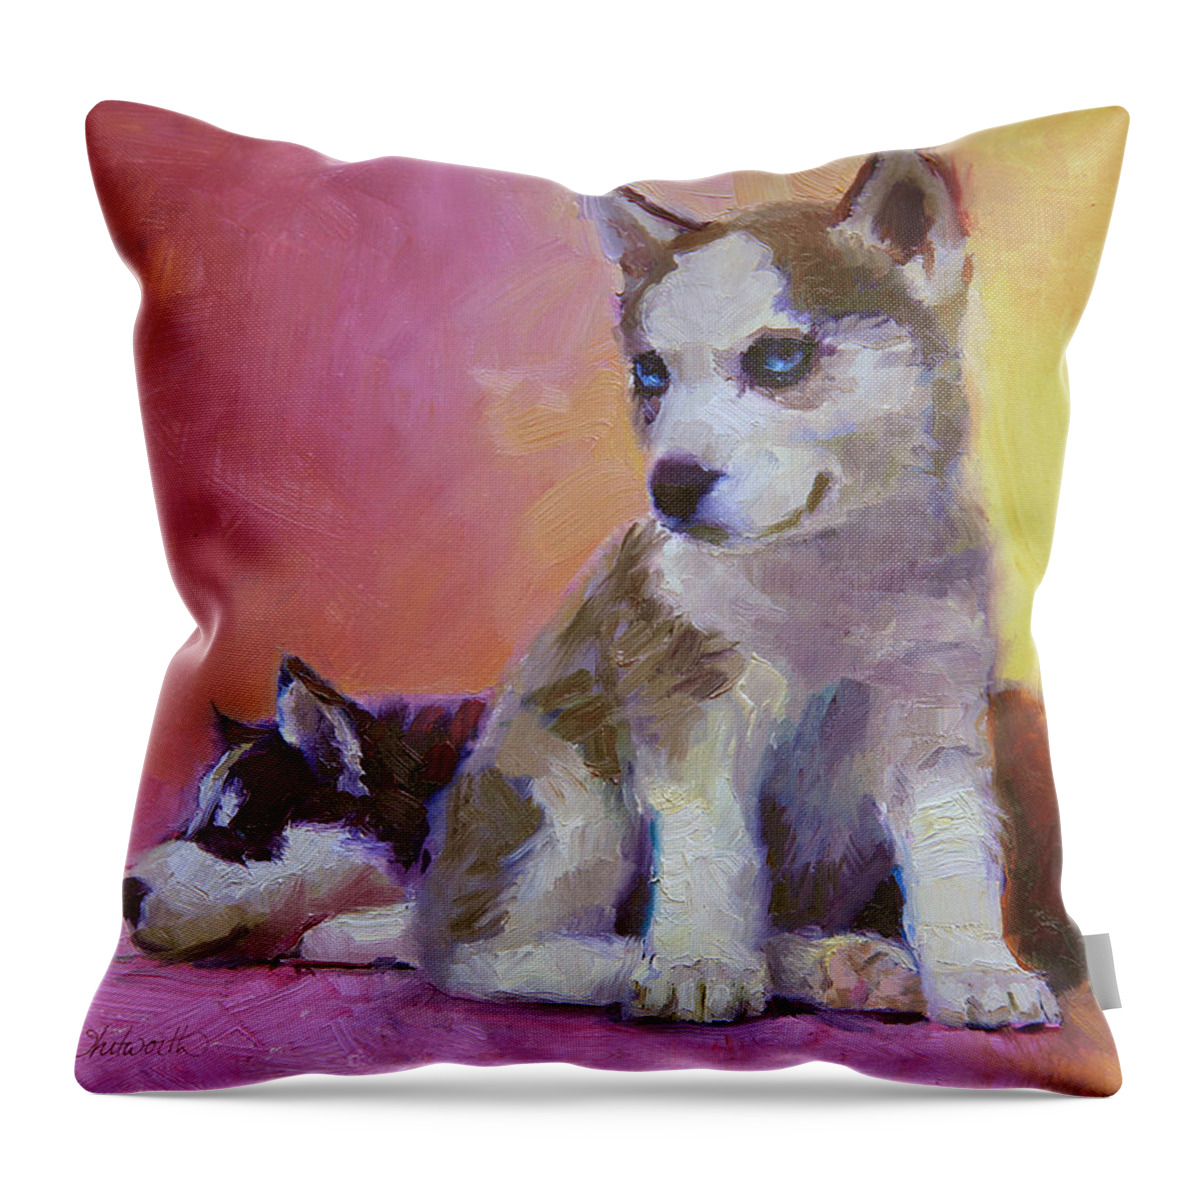 Husky Art Throw Pillow featuring the painting Double Trouble - Alaskan Husky Sled Dog Puppies by K Whitworth